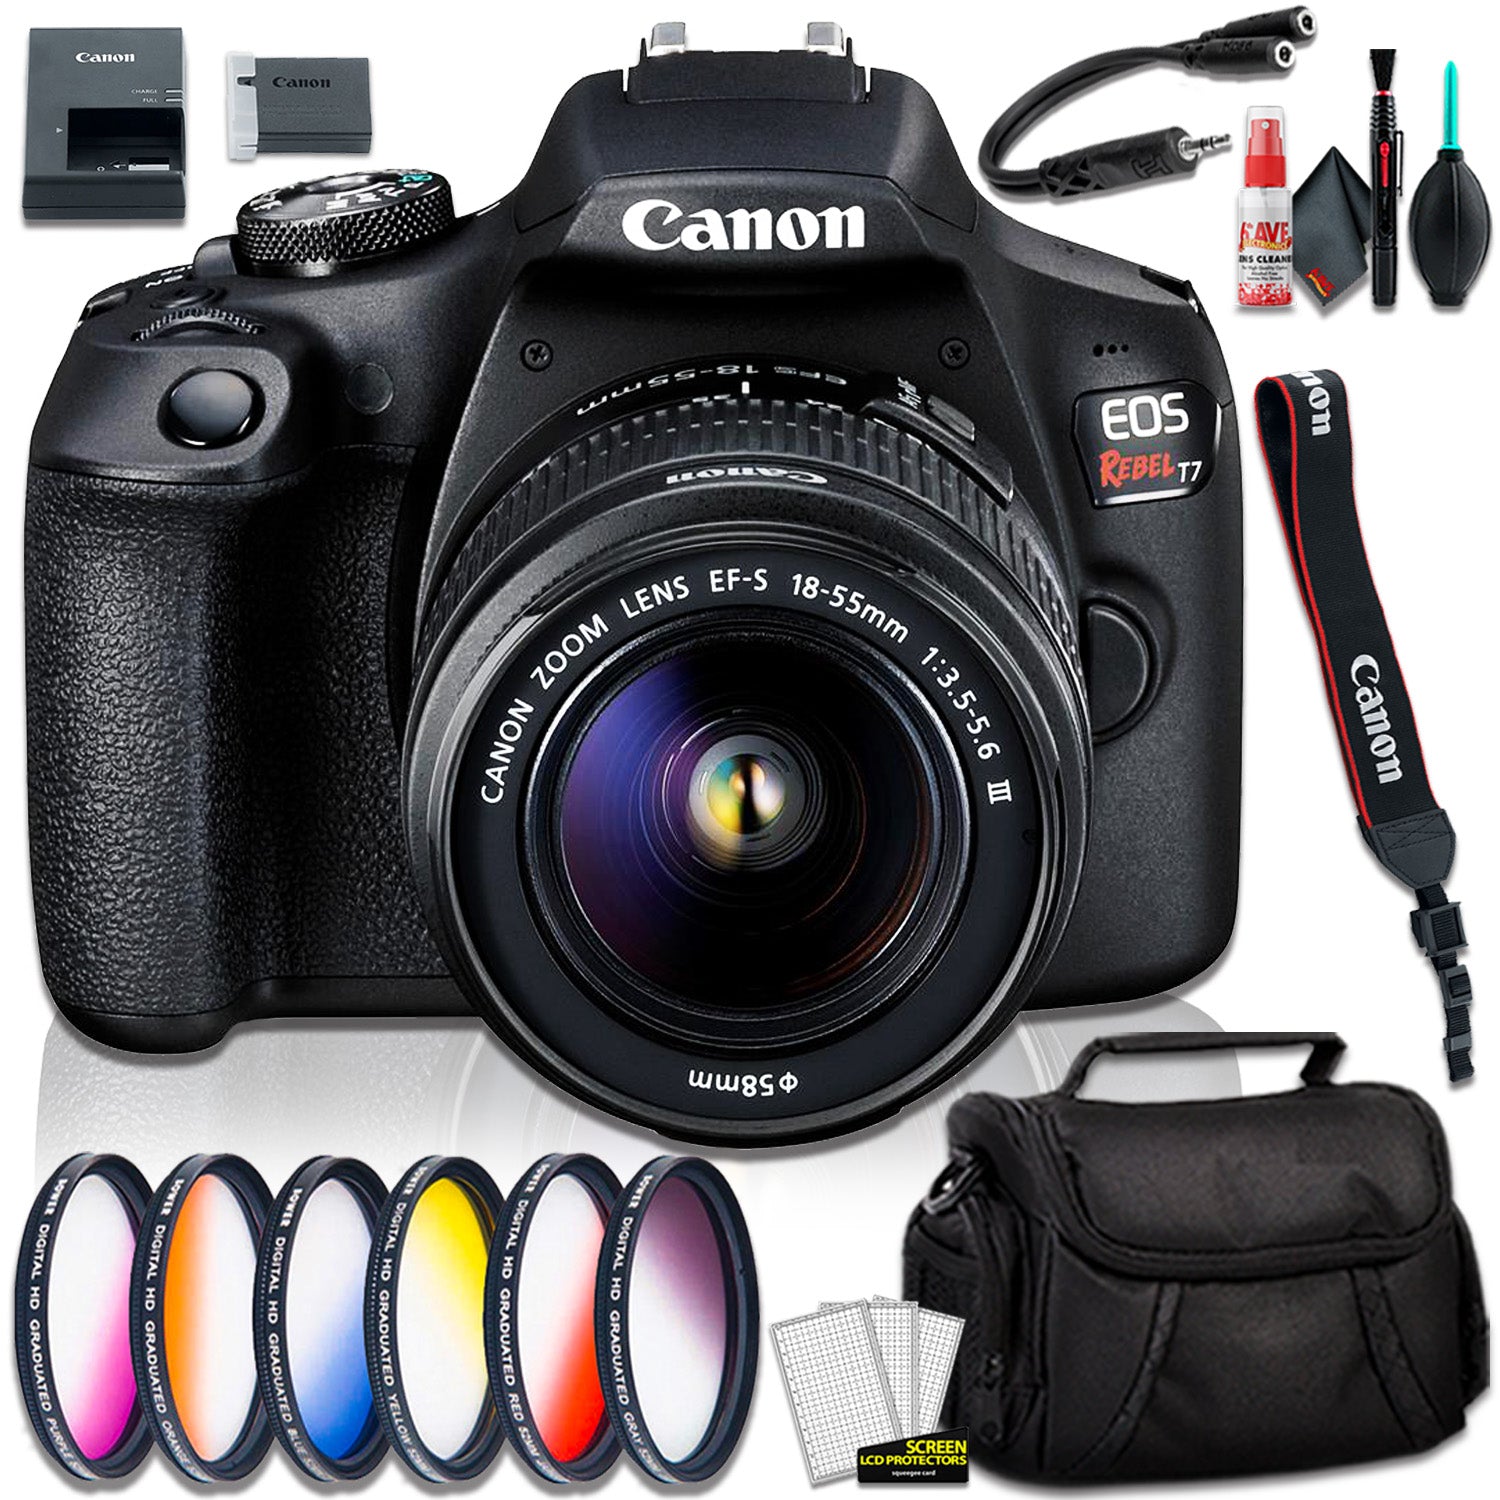 Canon EOS Rebel T7 DSLR Camera with 18-55mm DC III Lens, Camera, and Graduated Color Filter Kit